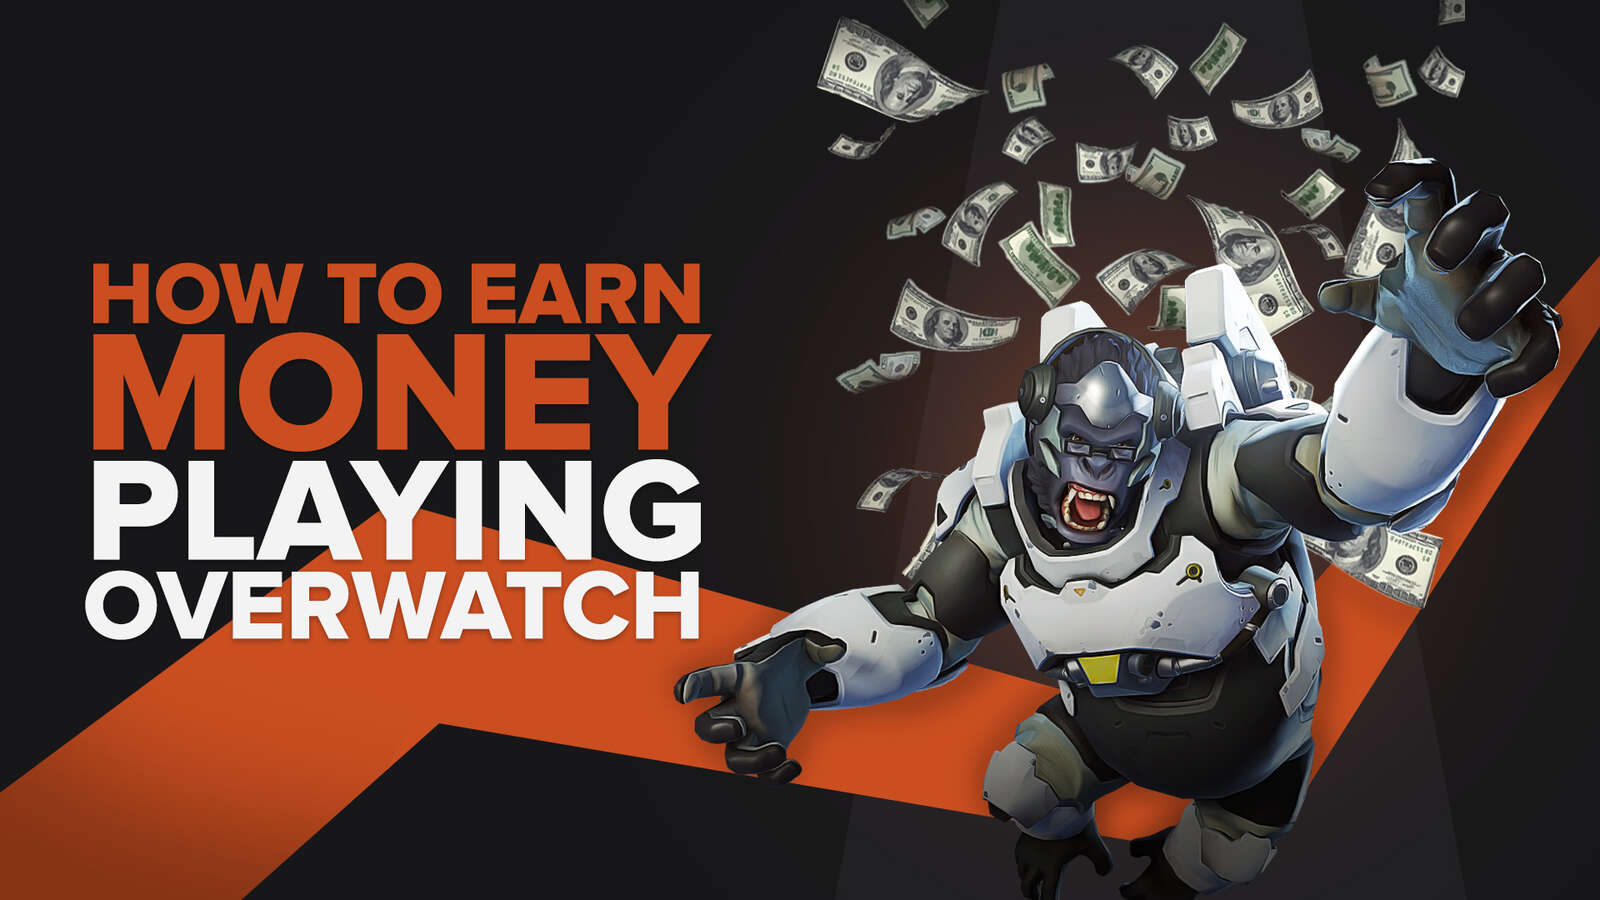 How To Earn Money Playing Overwatch [5 Legit Ways]